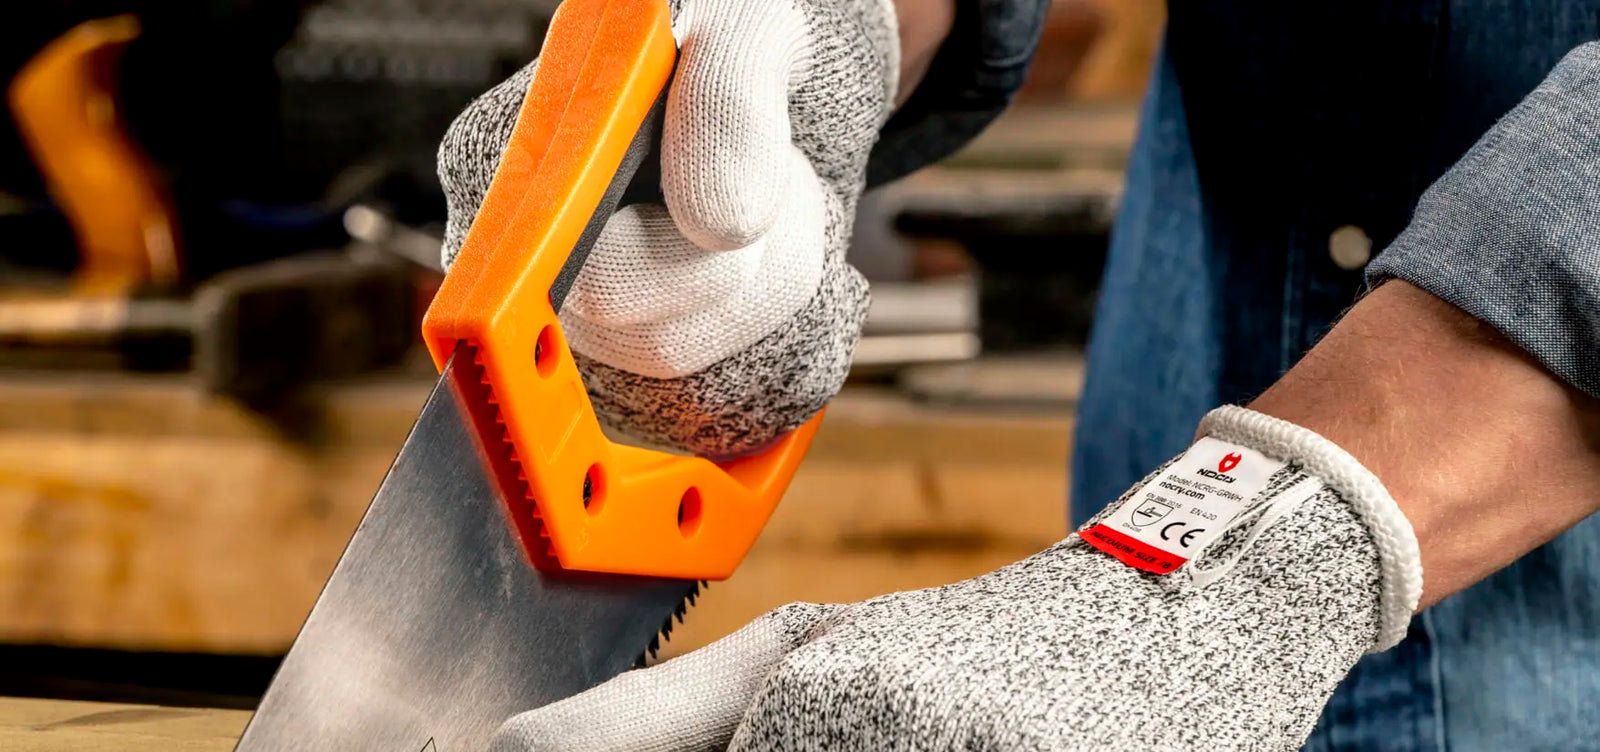 5 essential pieces of woodworking safety equipment